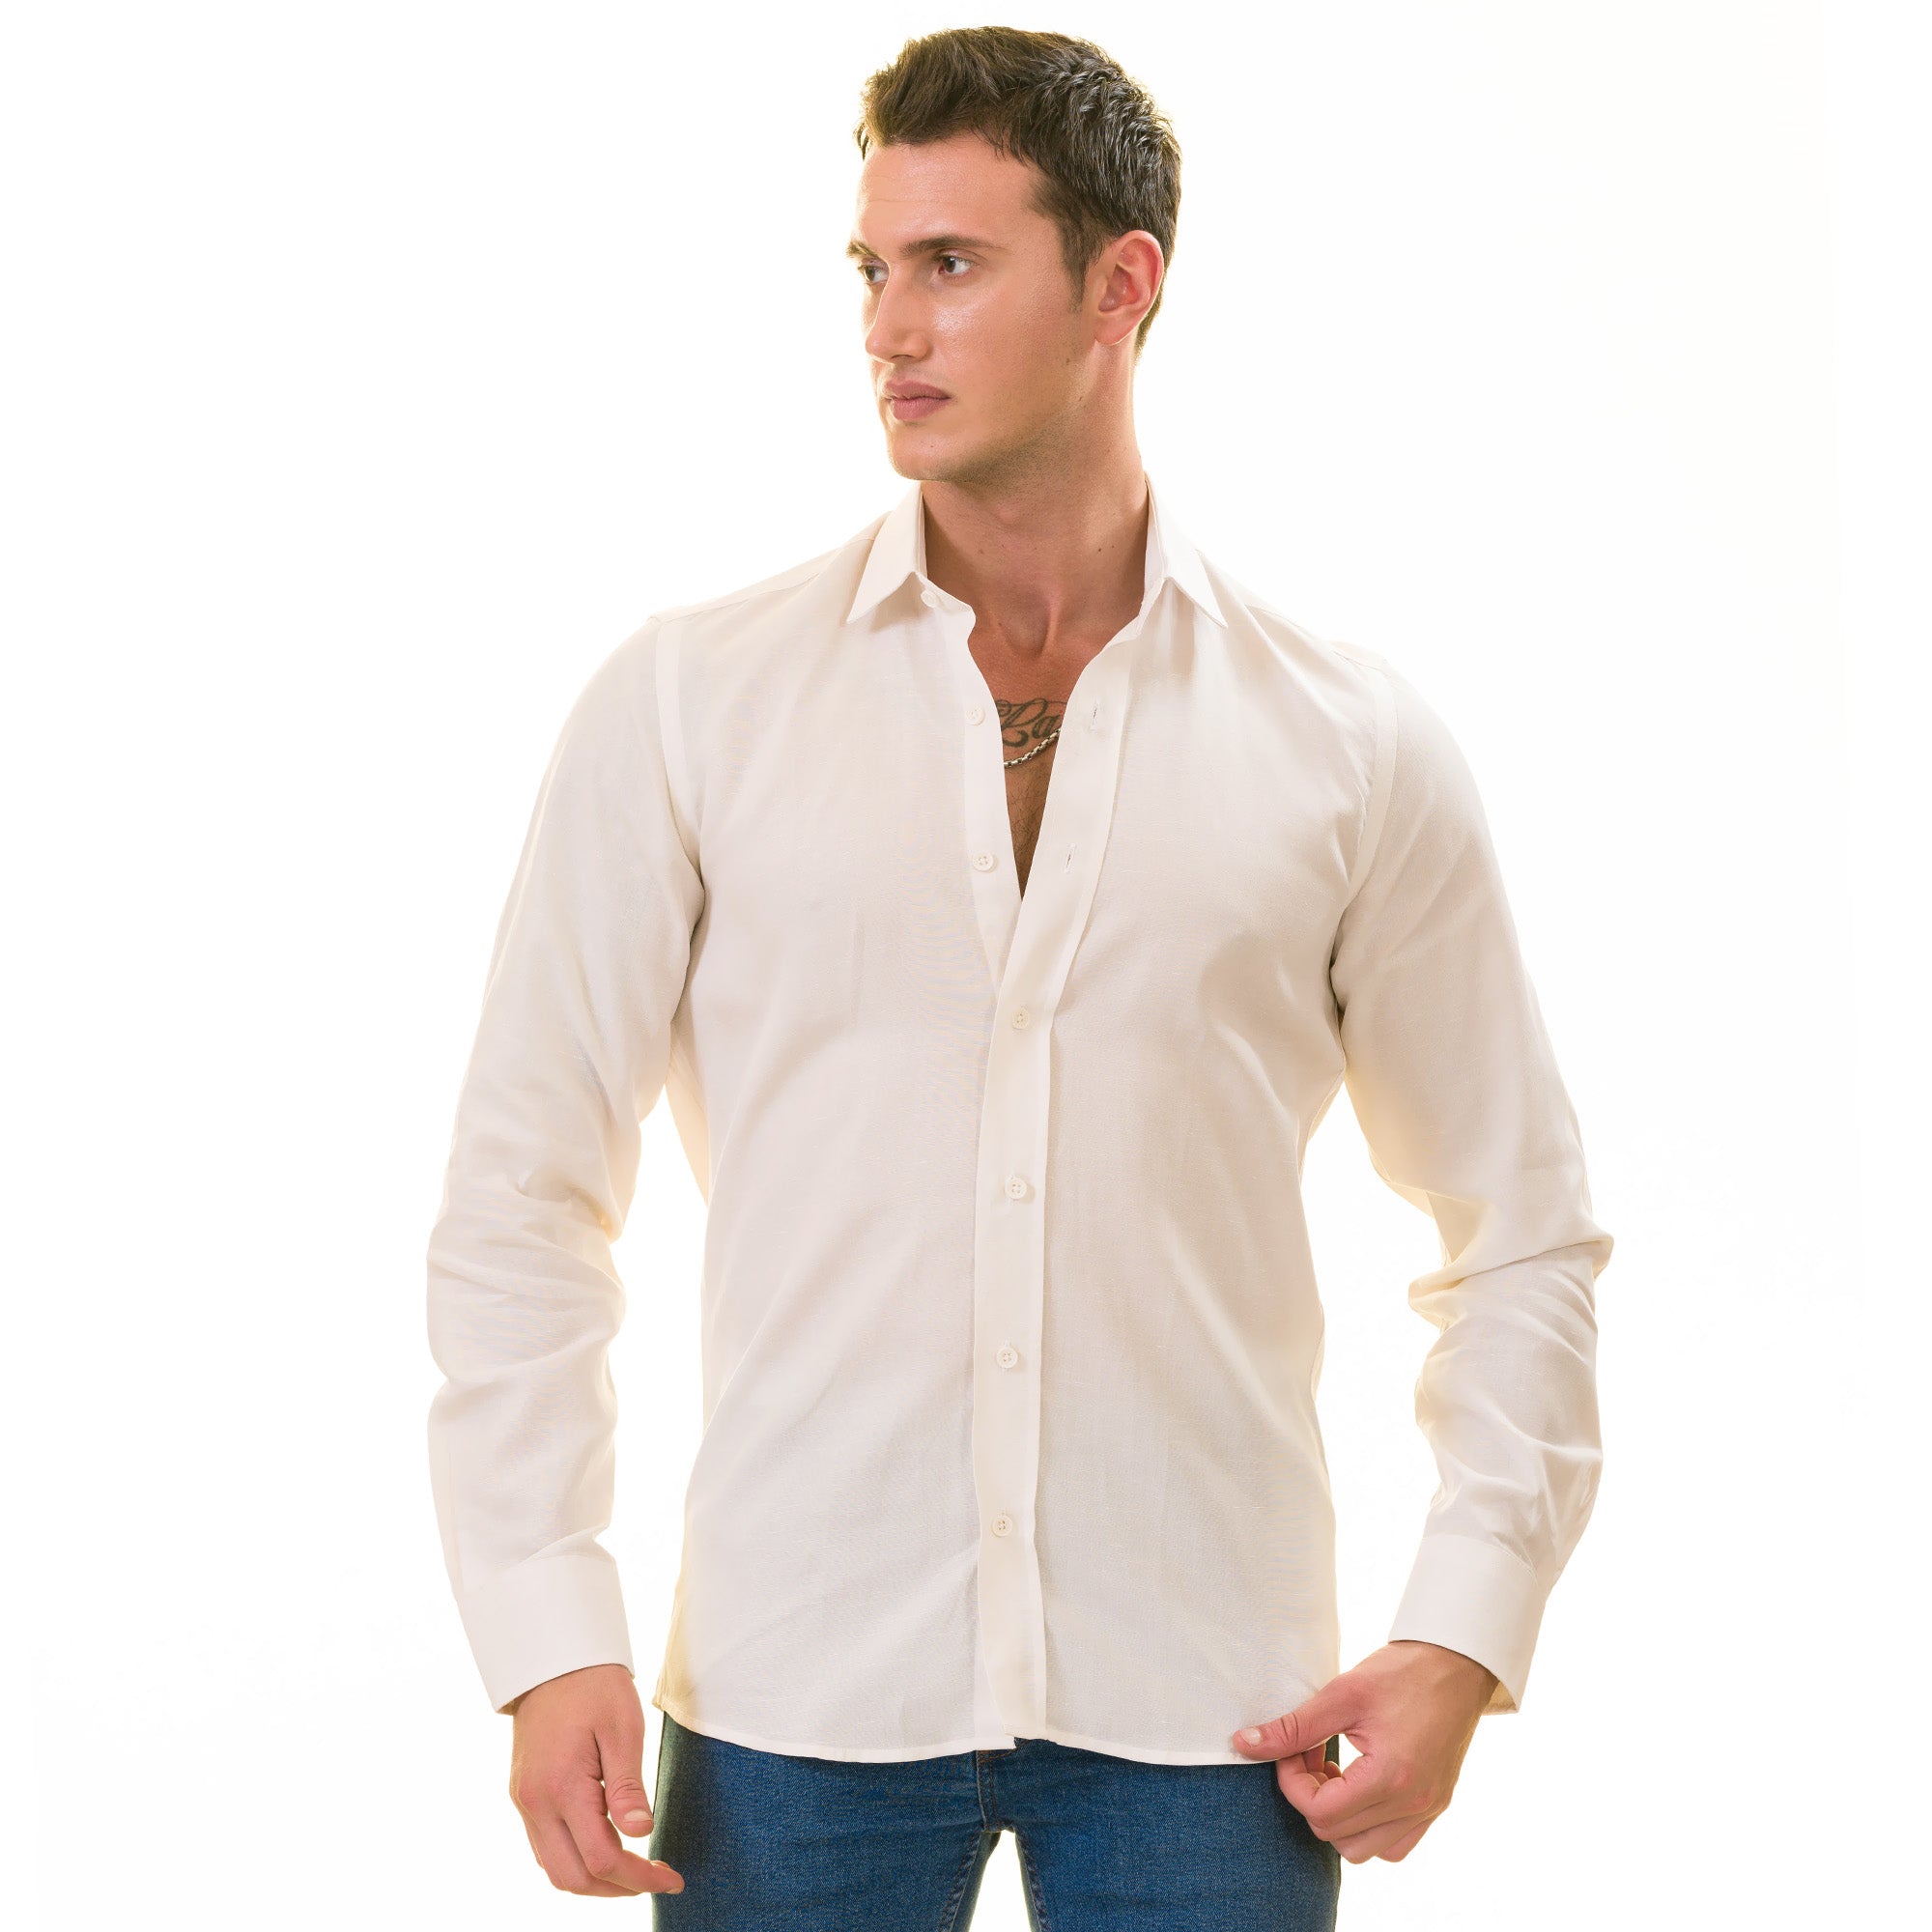 Off-White Luxury Men's Tailor Fit Button Up European Made Linen